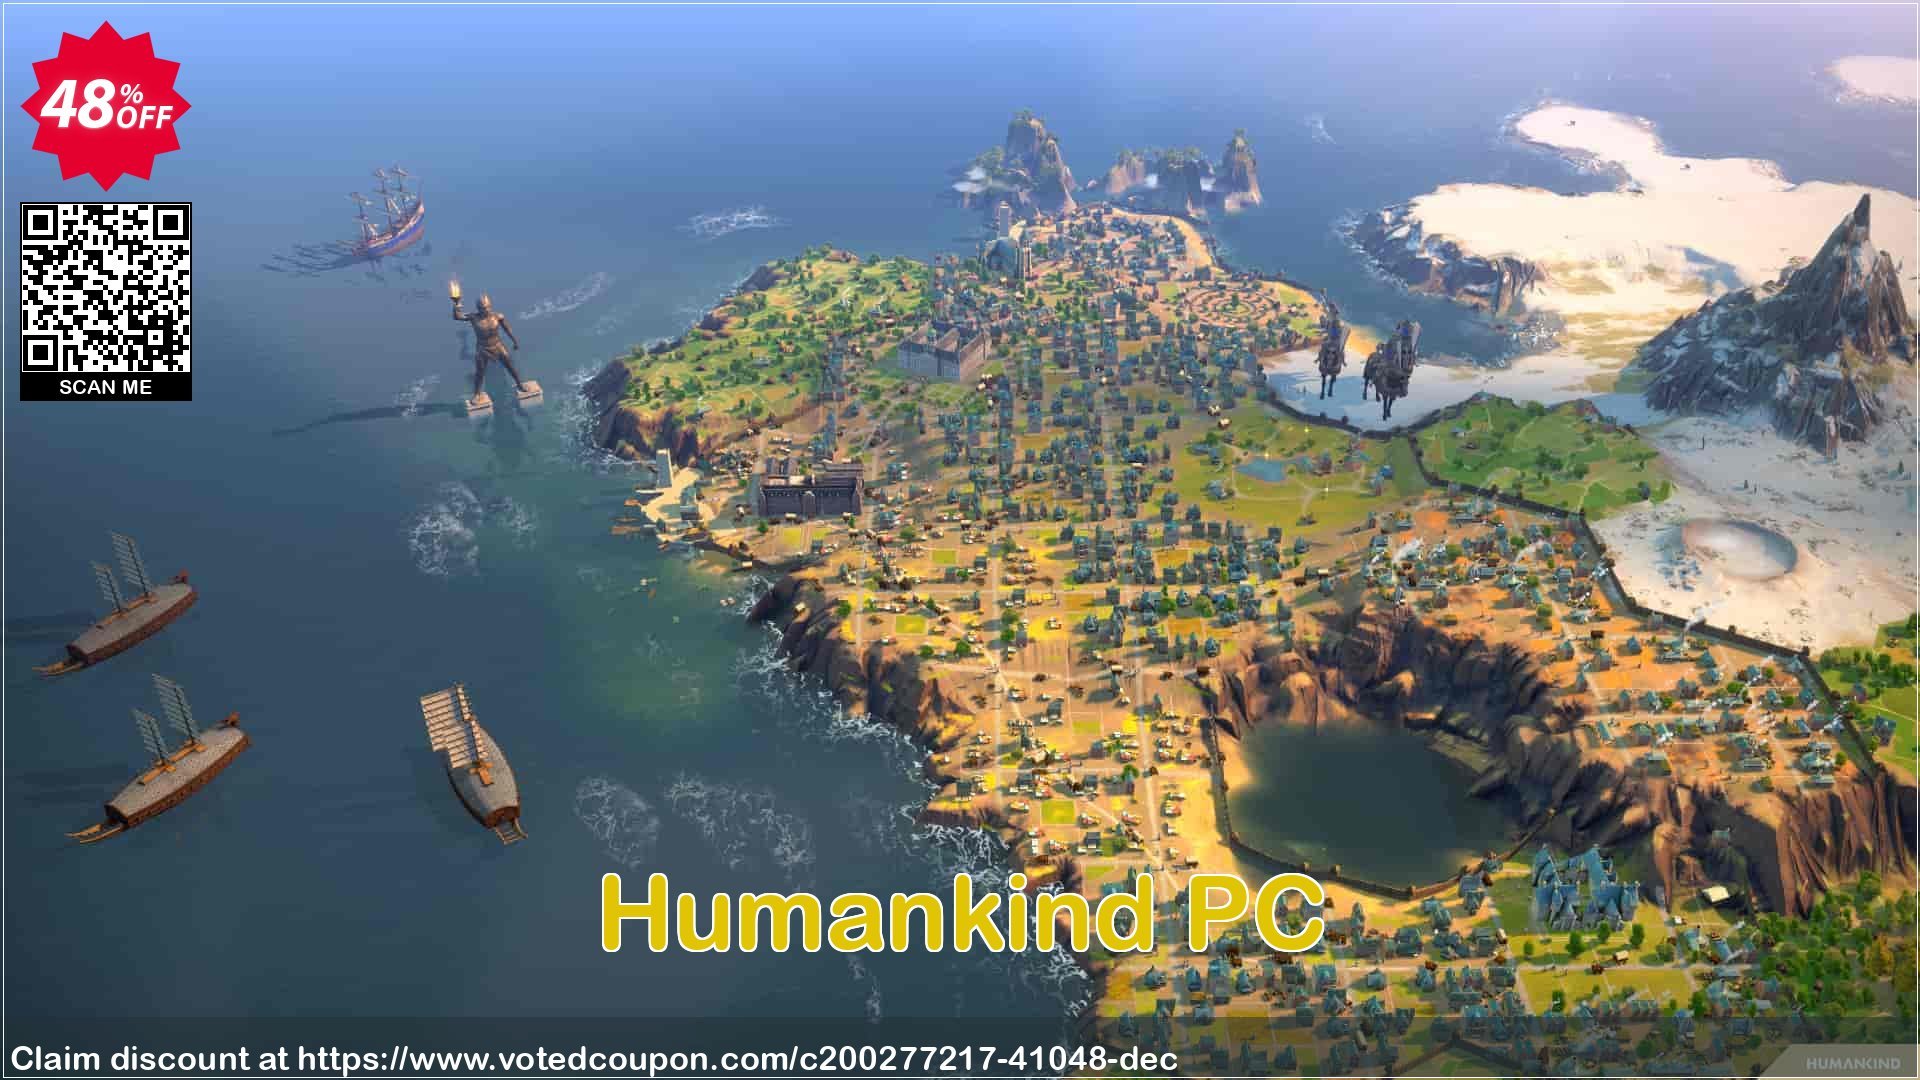 Humankind PC Coupon Code May 2024, 48% OFF - VotedCoupon